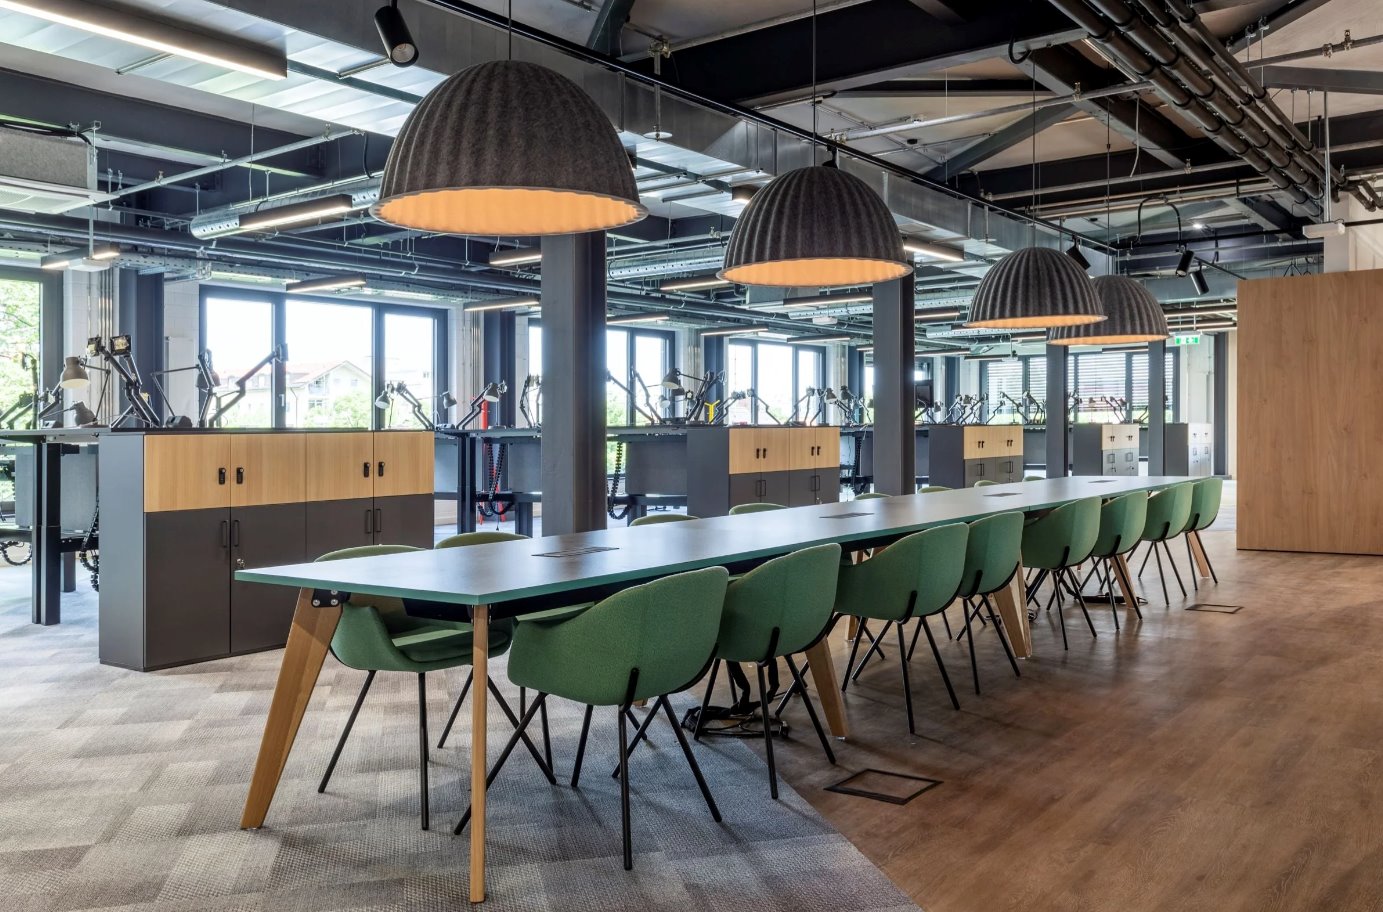 The Undeniable Benefits of Large Meeting Tables in Open Co-Working Spaces